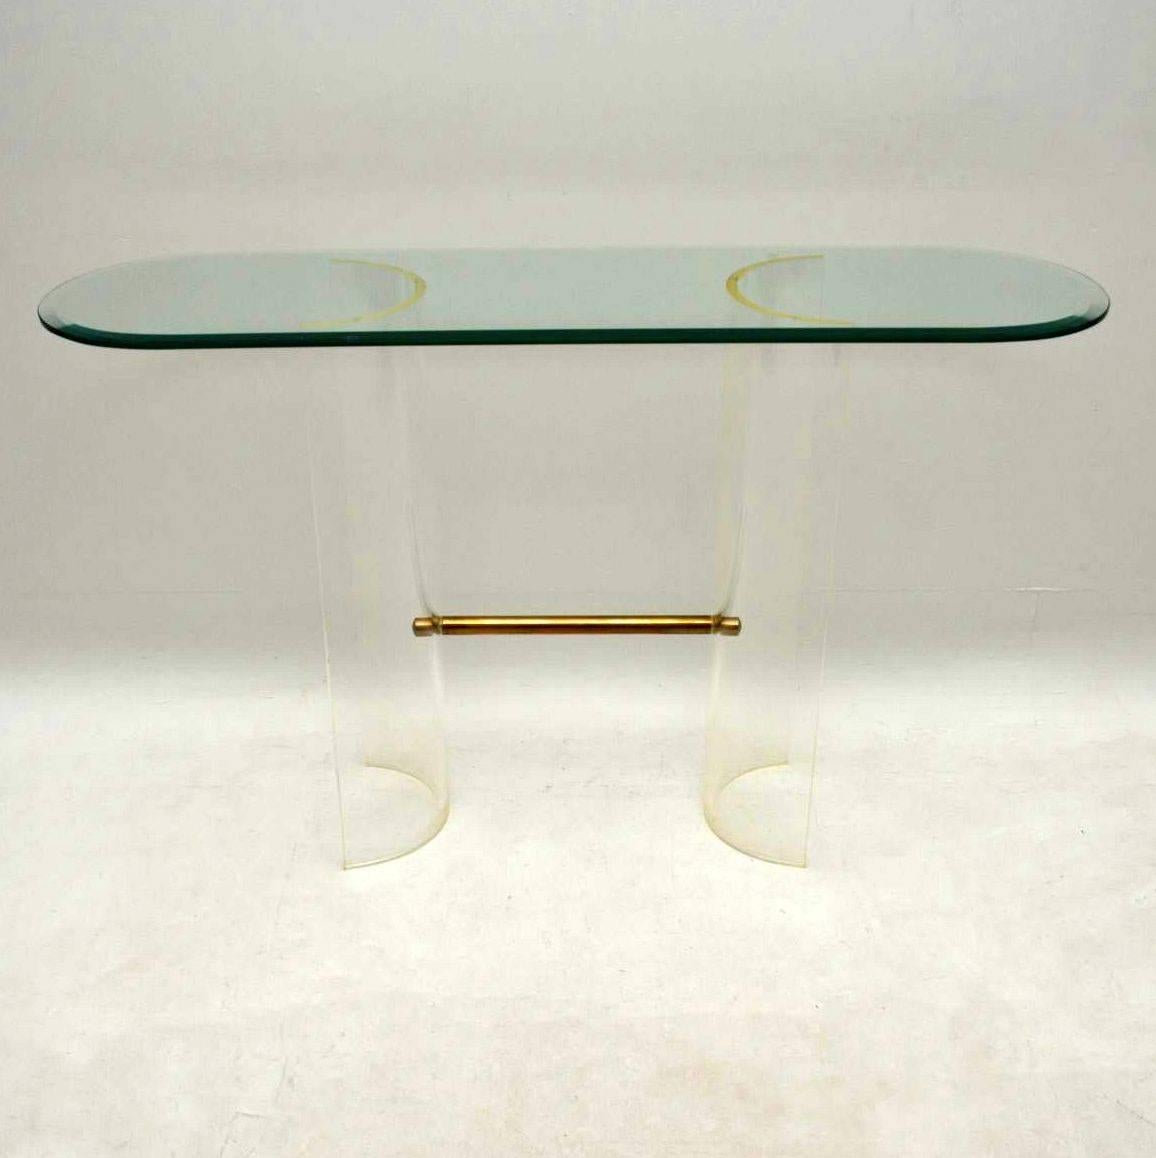 A very stylish and unusual console table, this dates from the 1970s. It was most likely made in France or Italy, and it's of excellent quality. The base is curved perspex, joined at the base by a brass rod. The top is clear bevelled glass. The